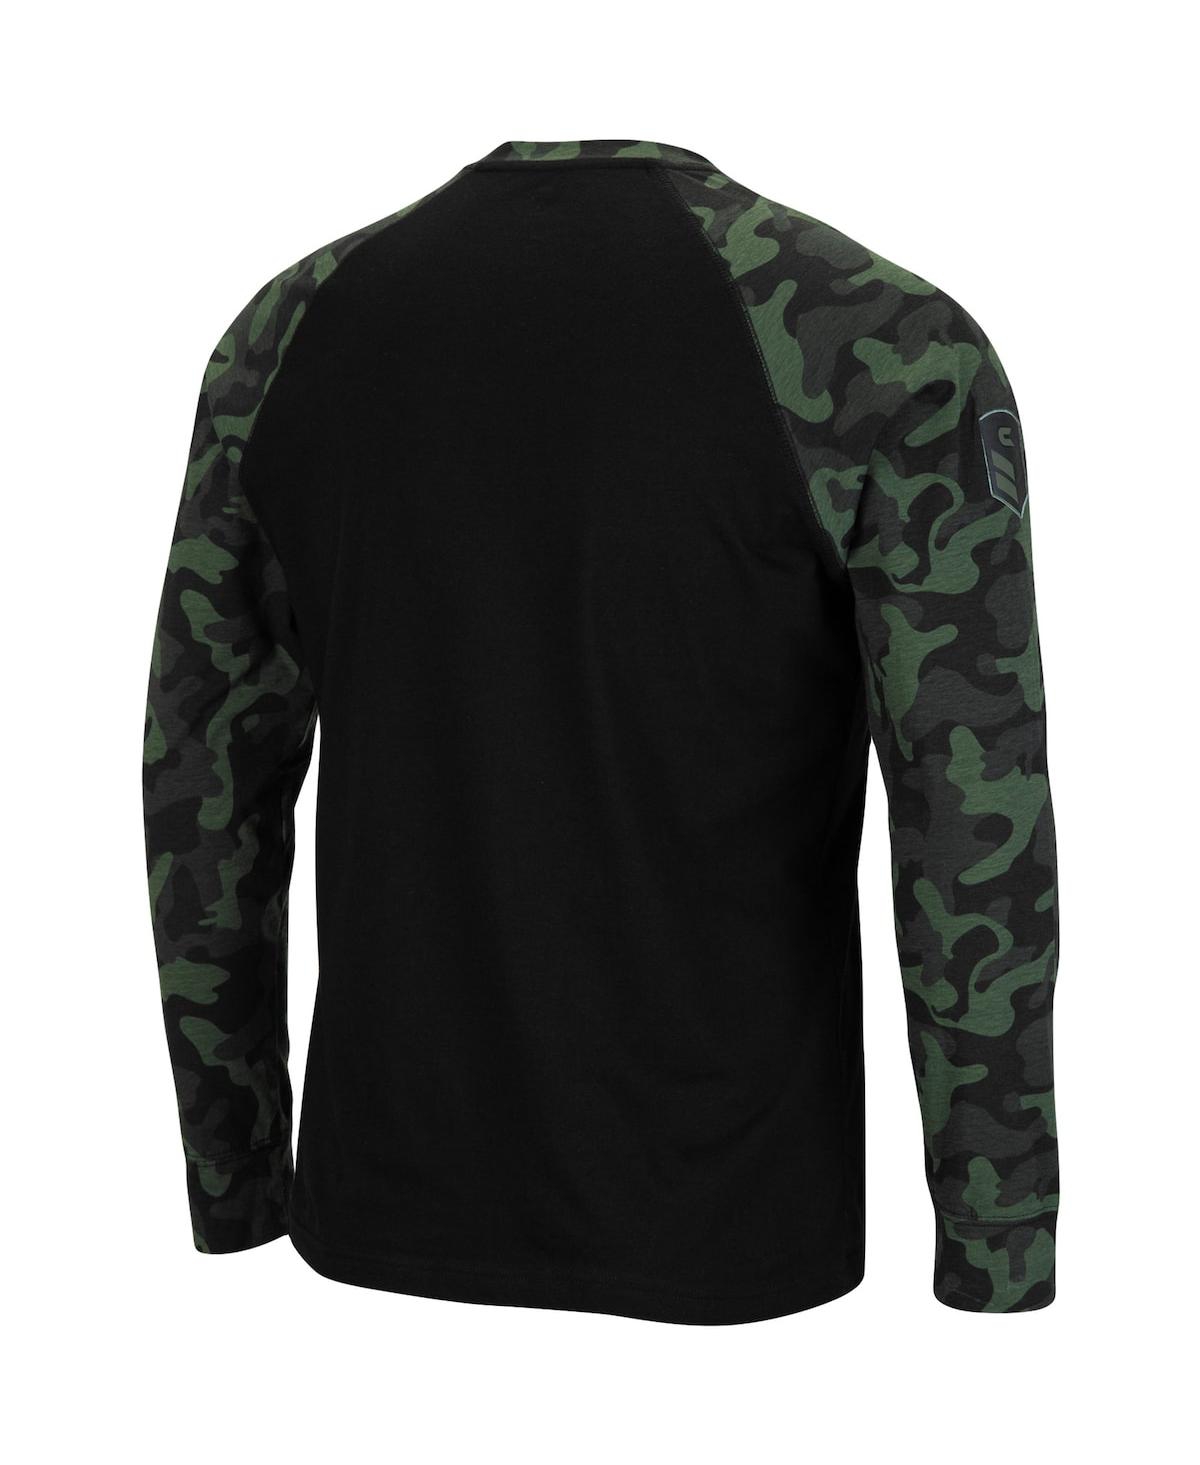 Shop Colosseum Men's  Black And Camo Clemson Tigers Oht Military-inspired Appreciation Big And Tall Raglan In Black,camo